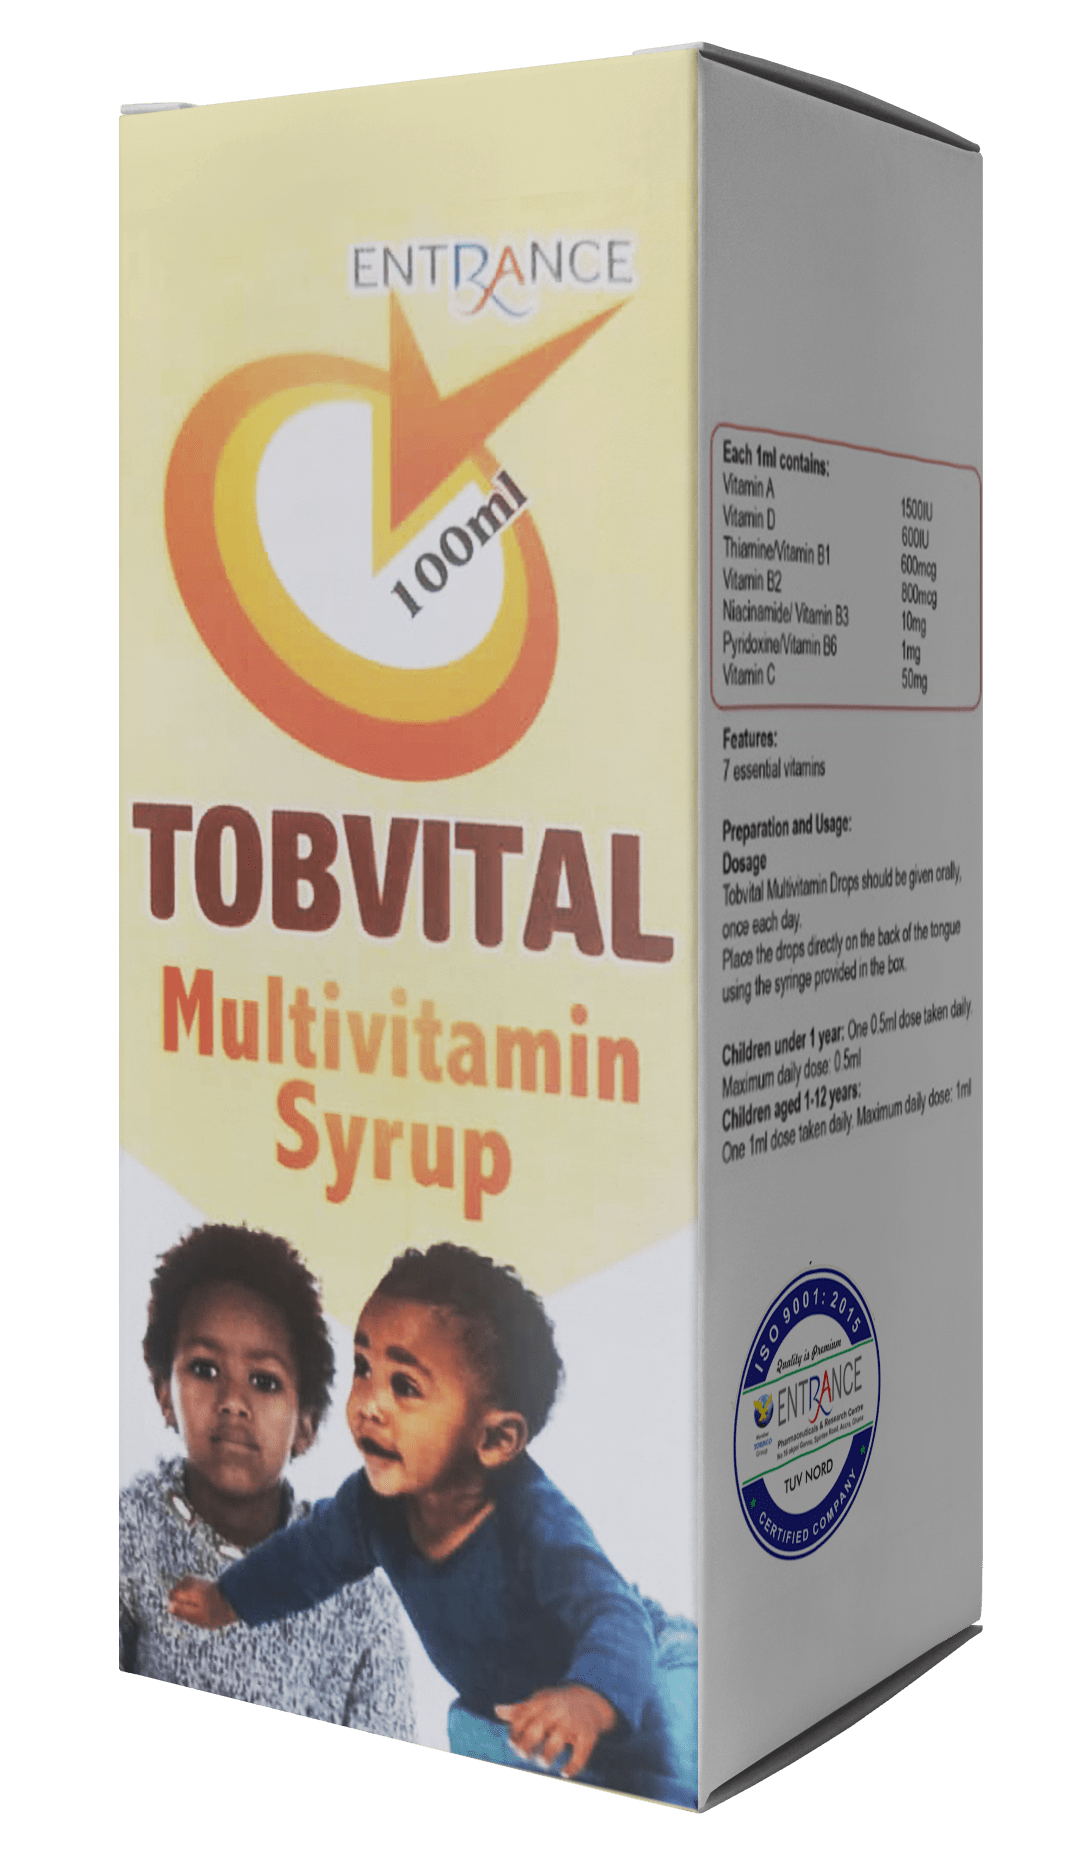 1683634643_TOBVITAL-SYRUP-min.png